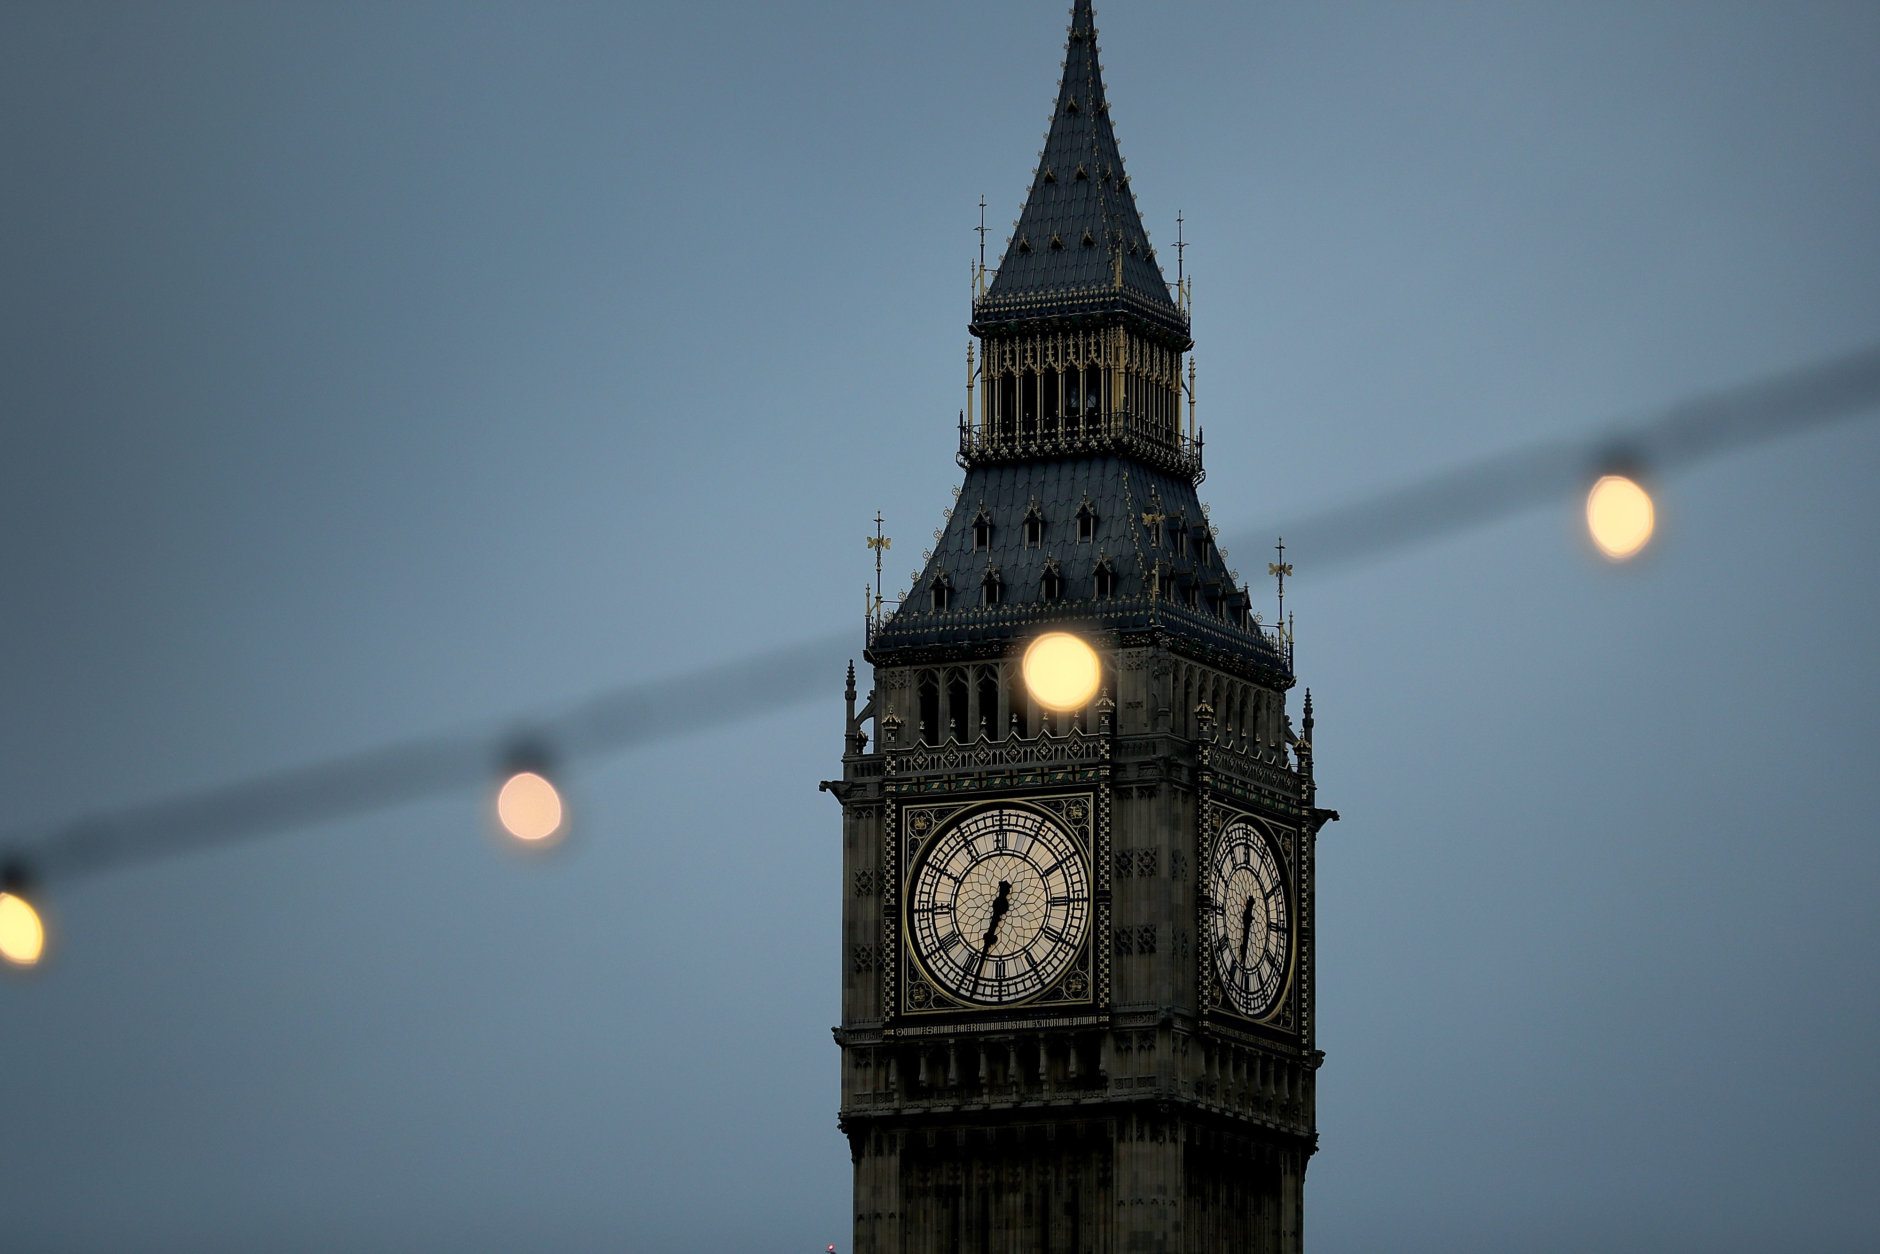 LONDON, ENGLAND - MARCH 14:   A grey dawn breaks over Elizabeth Tower and parliament on March 14, 2017 in London, England. Reports suggest that Article 50 could be triggered soon and begin the process that will take Britain out of the European Union after parliament passed the Brexit bill last night.  (Photo by Christopher Furlong/Getty Images)